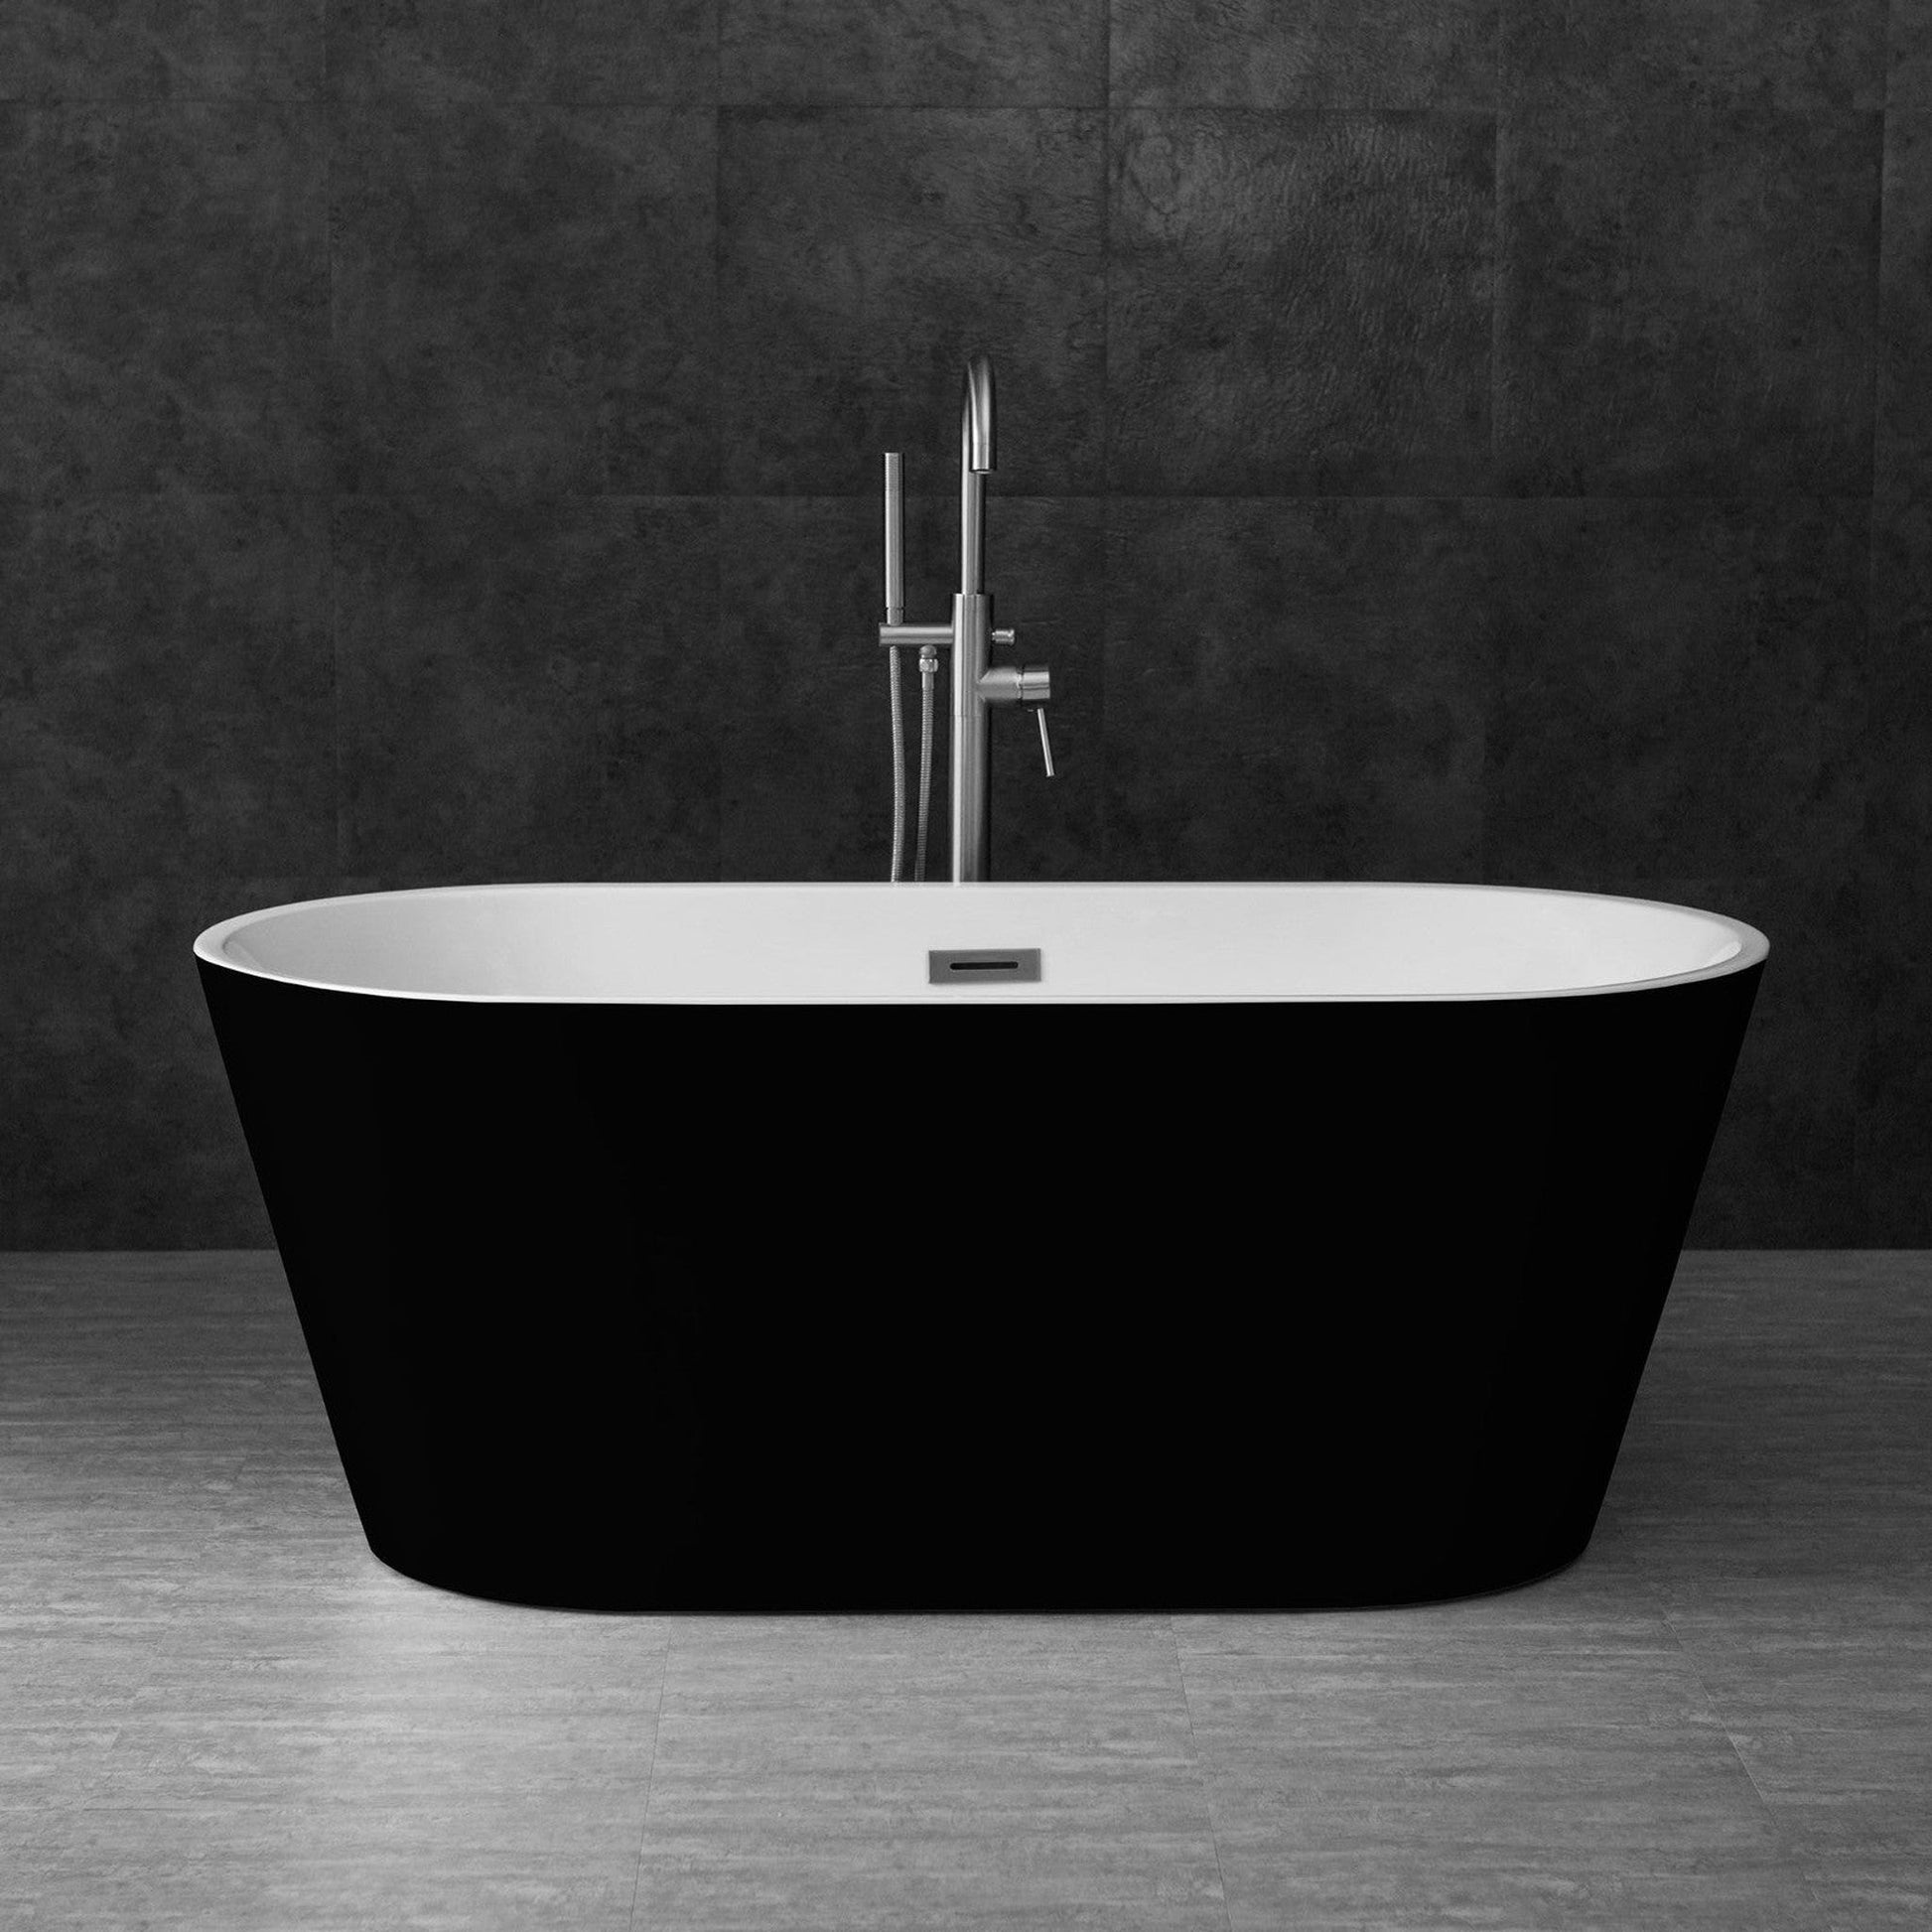 WoodBridge 59" Black Acrylic Freestanding Contemporary Soaking Bathtub With Brushed Nickel Drain, Overflow, F0070BNRD Tub Filler and Caddy Tray